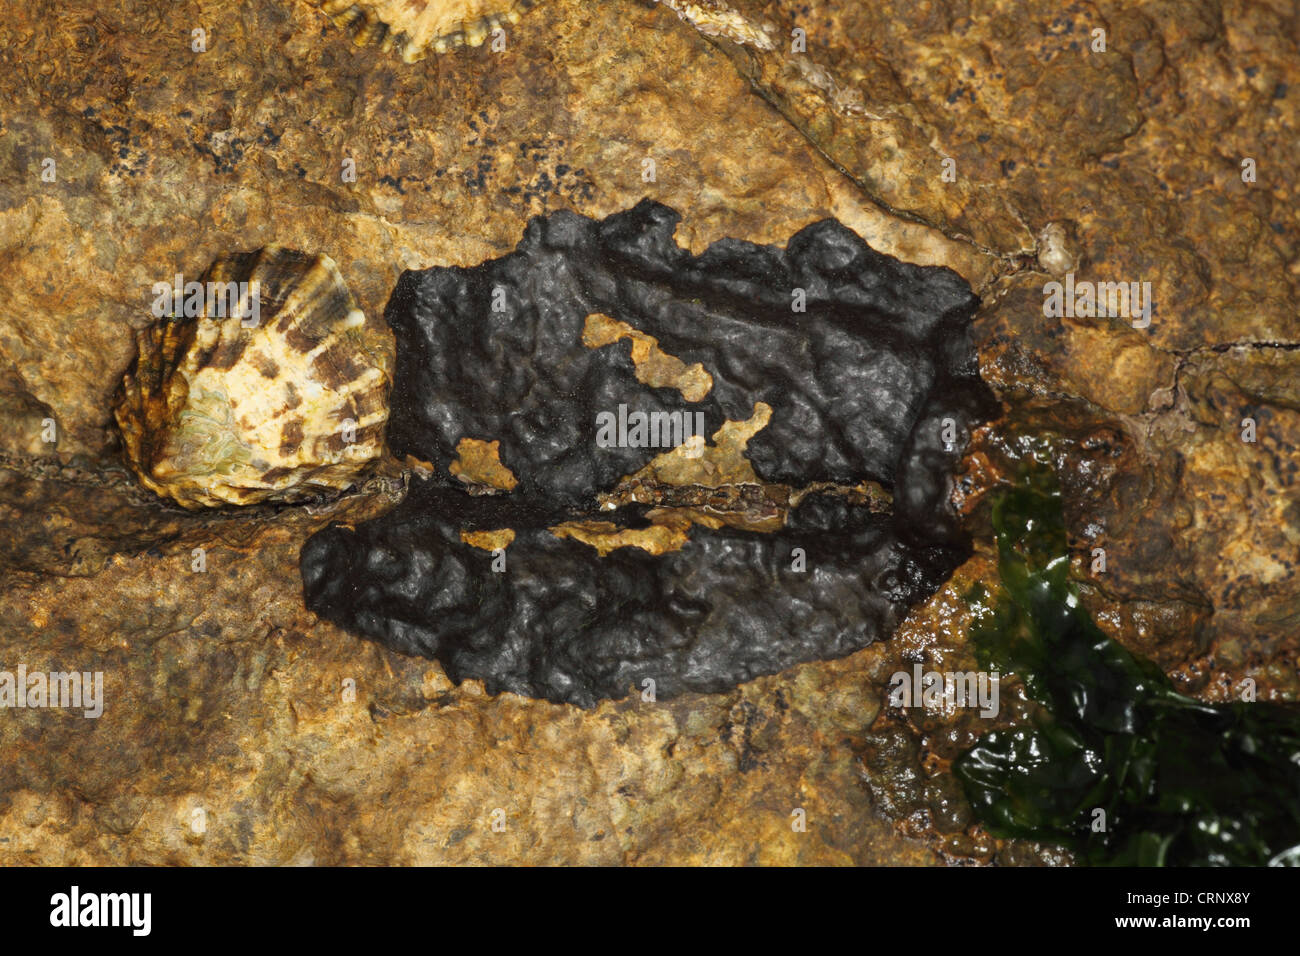 Tar Lichen (Verrucaria mucosa) growing on coastal rock with limpet, Swanage, Dorset, England, april Stock Photo